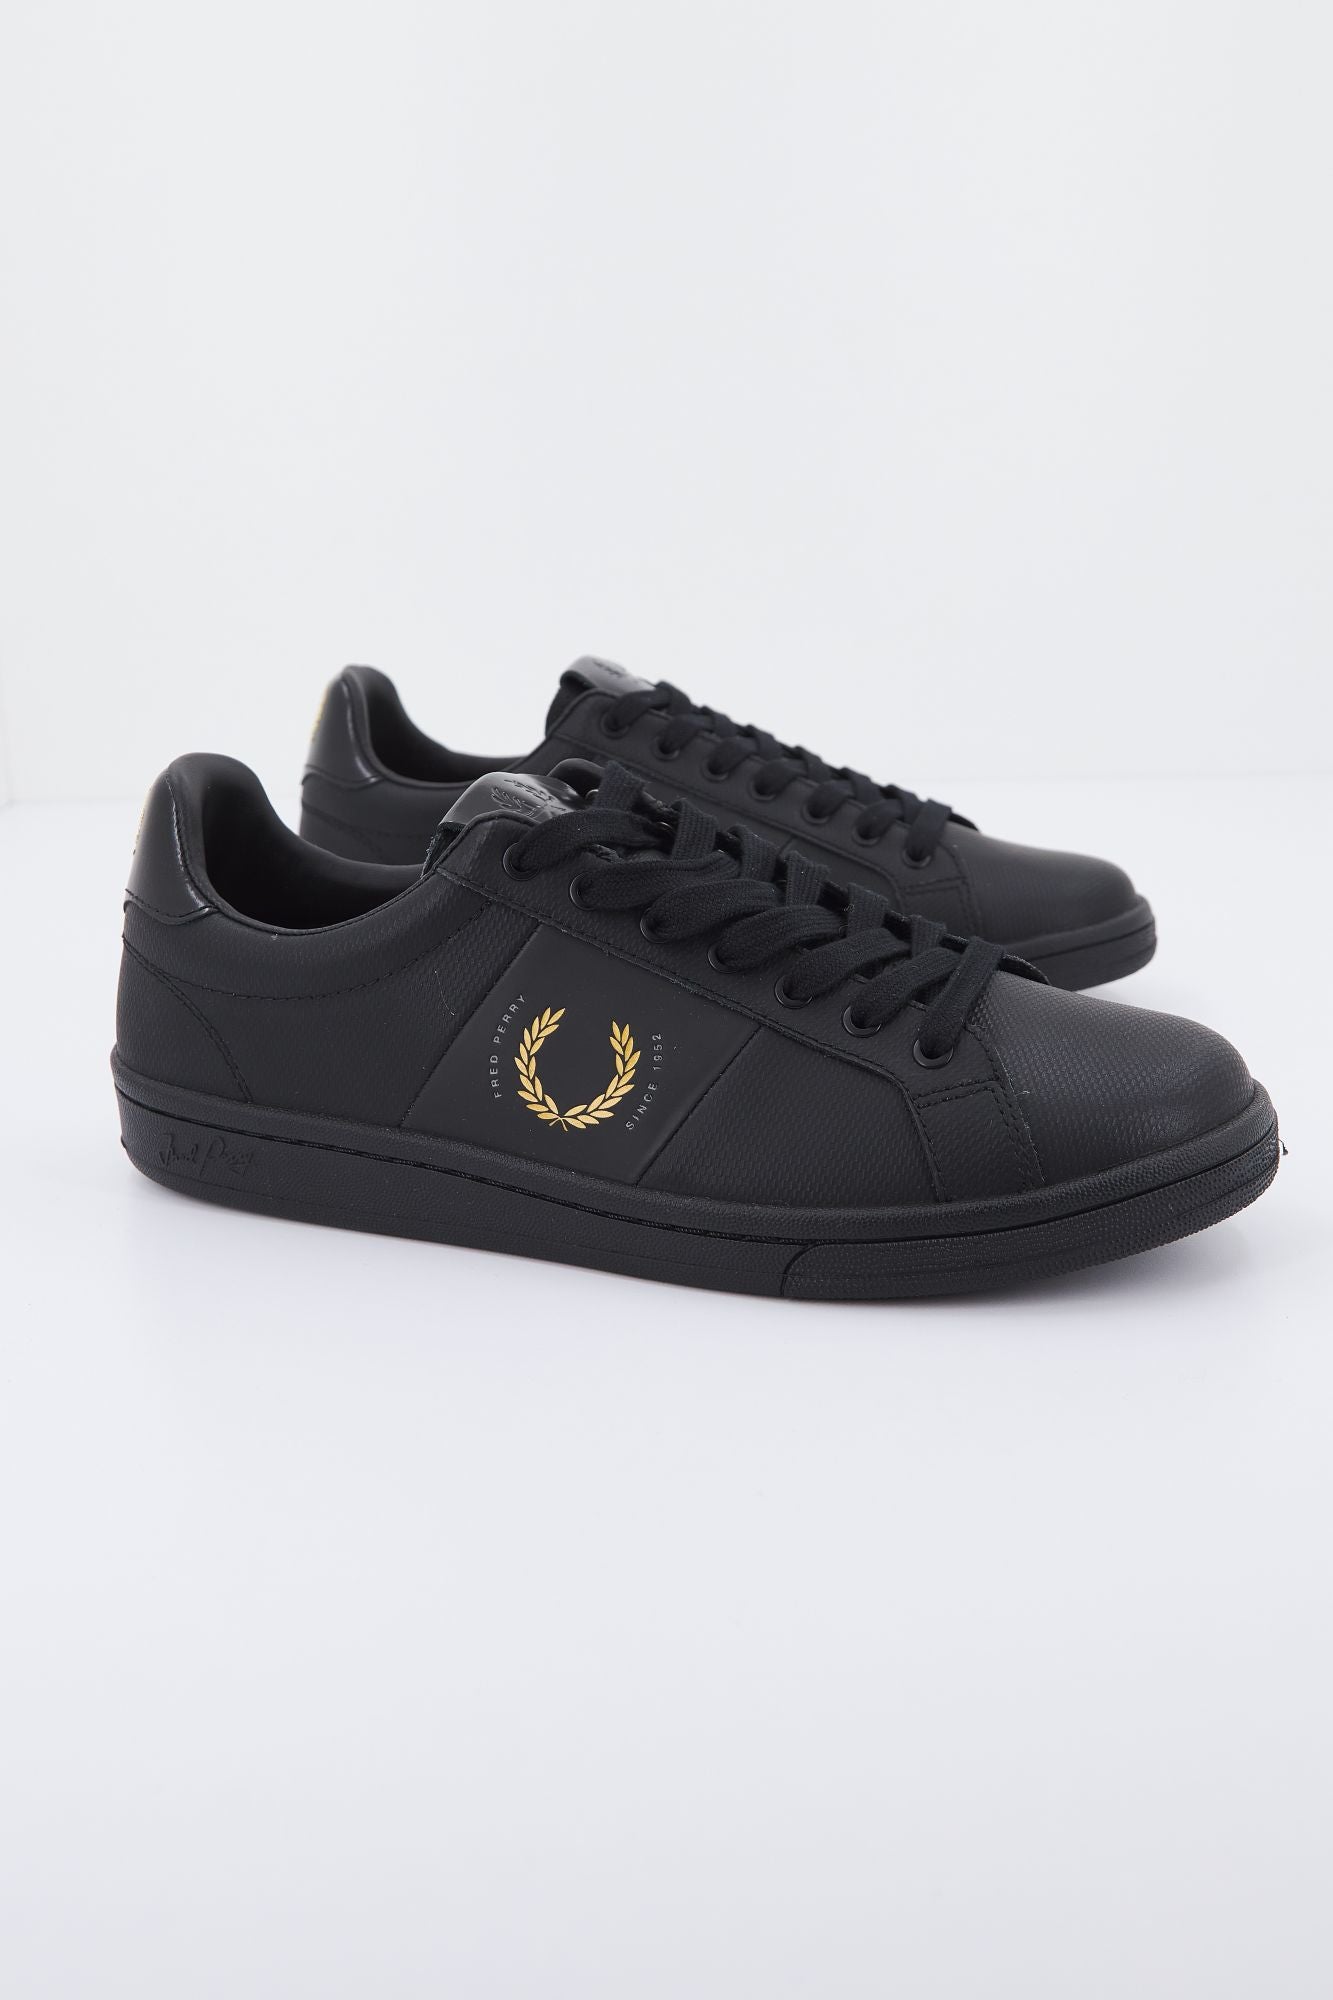 FRED PERRY B2341 en color NEGRO (1)